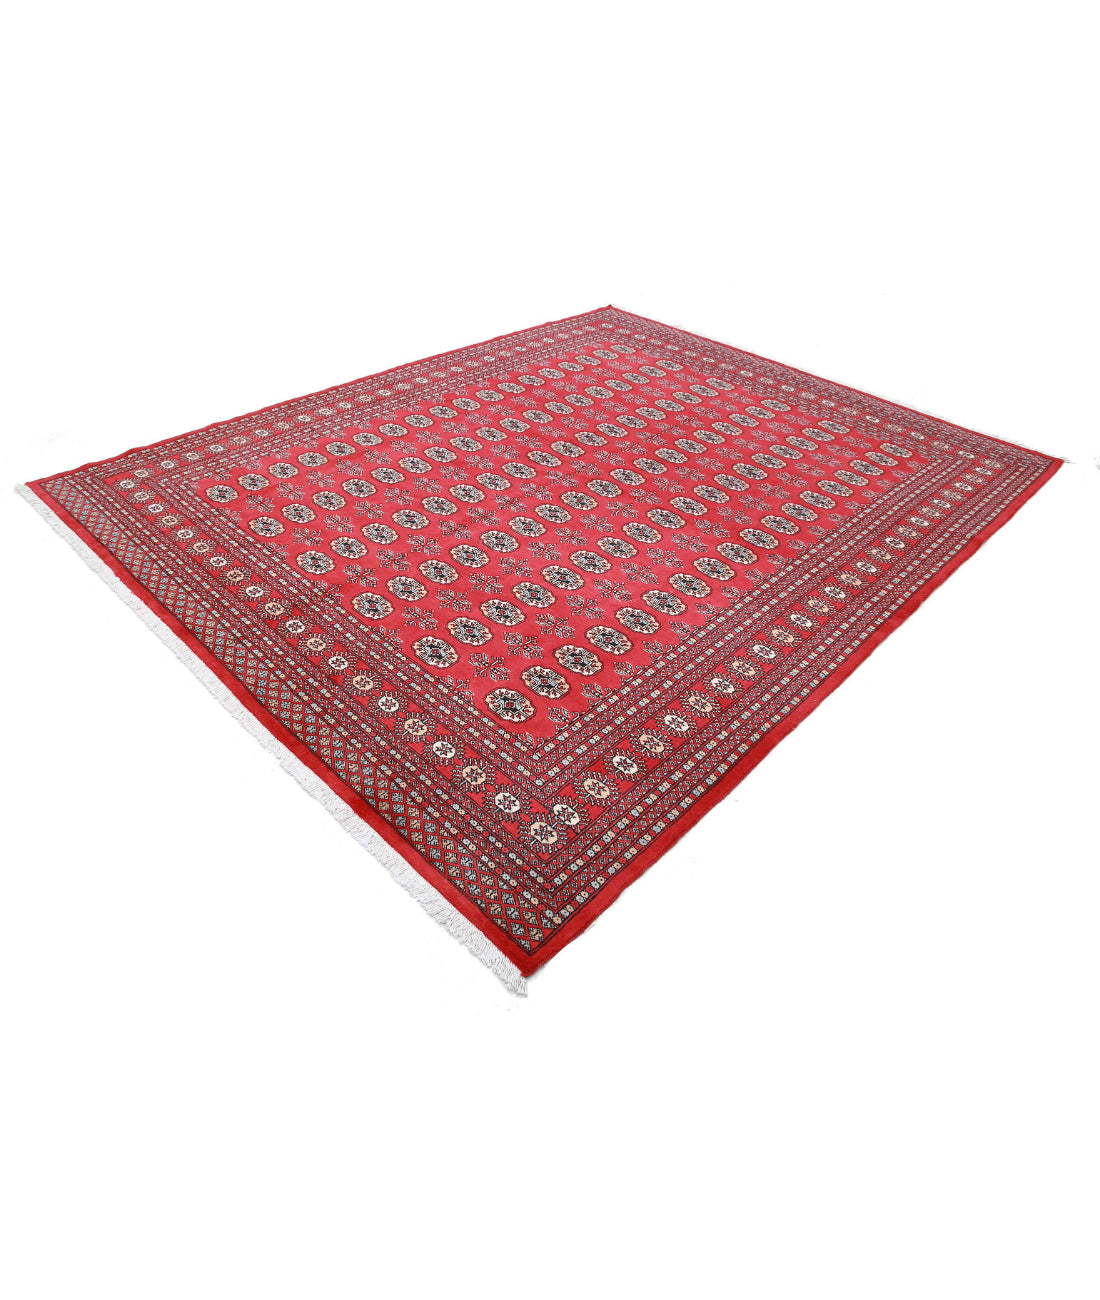 Hand Knotted Tribal Bokhara Wool Rug - 8'0'' x 9'11'' 8'0'' x 9'11'' (240 X 298) / Red / Beige